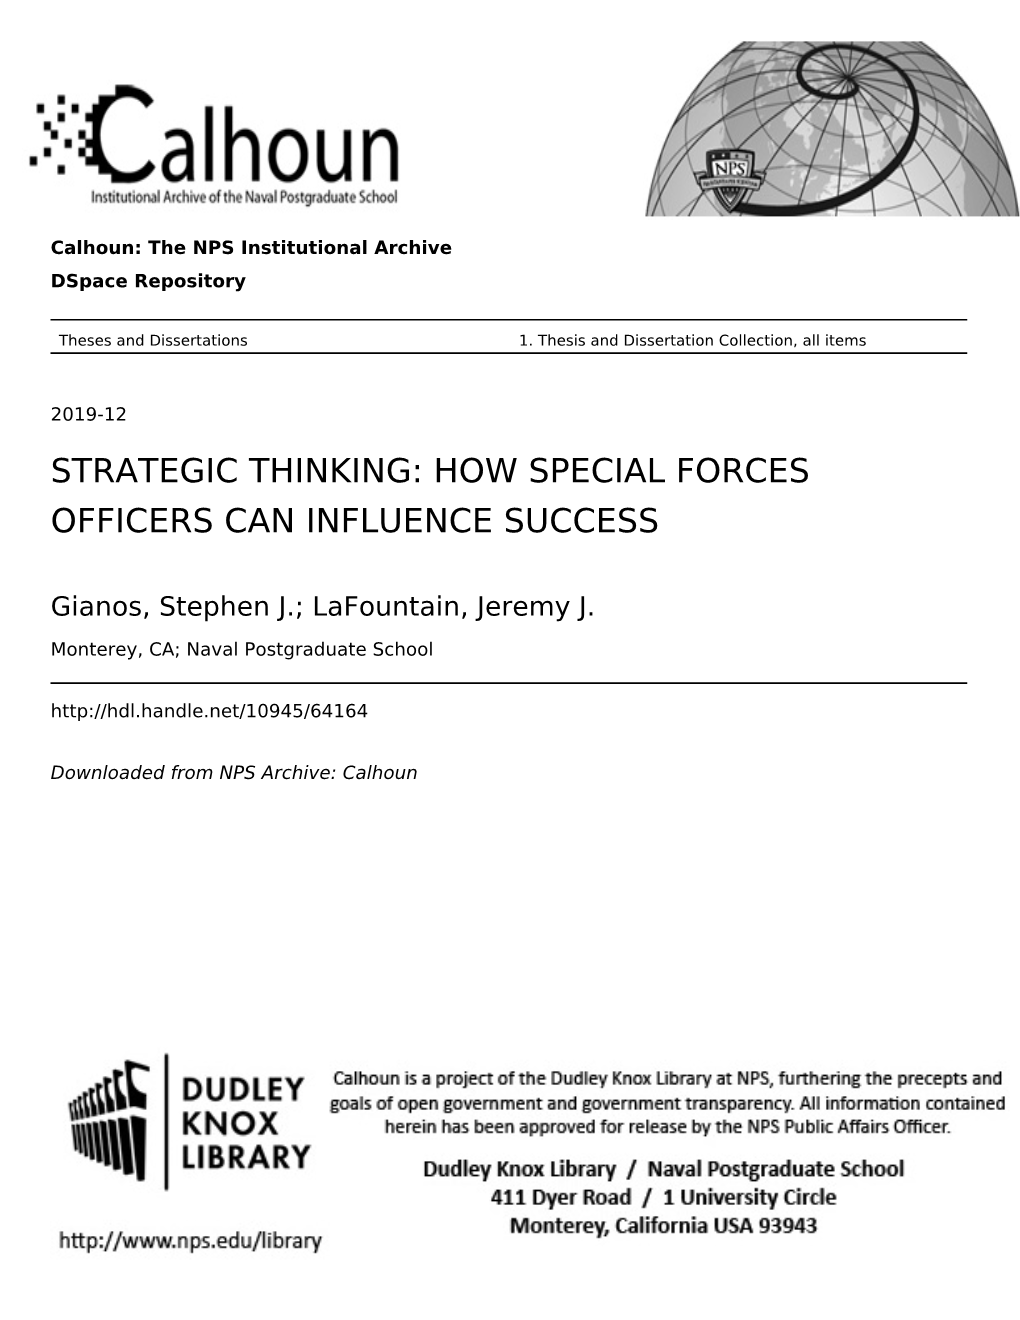 Strategic Thinking: How Special Forces Officers Can Influence Success